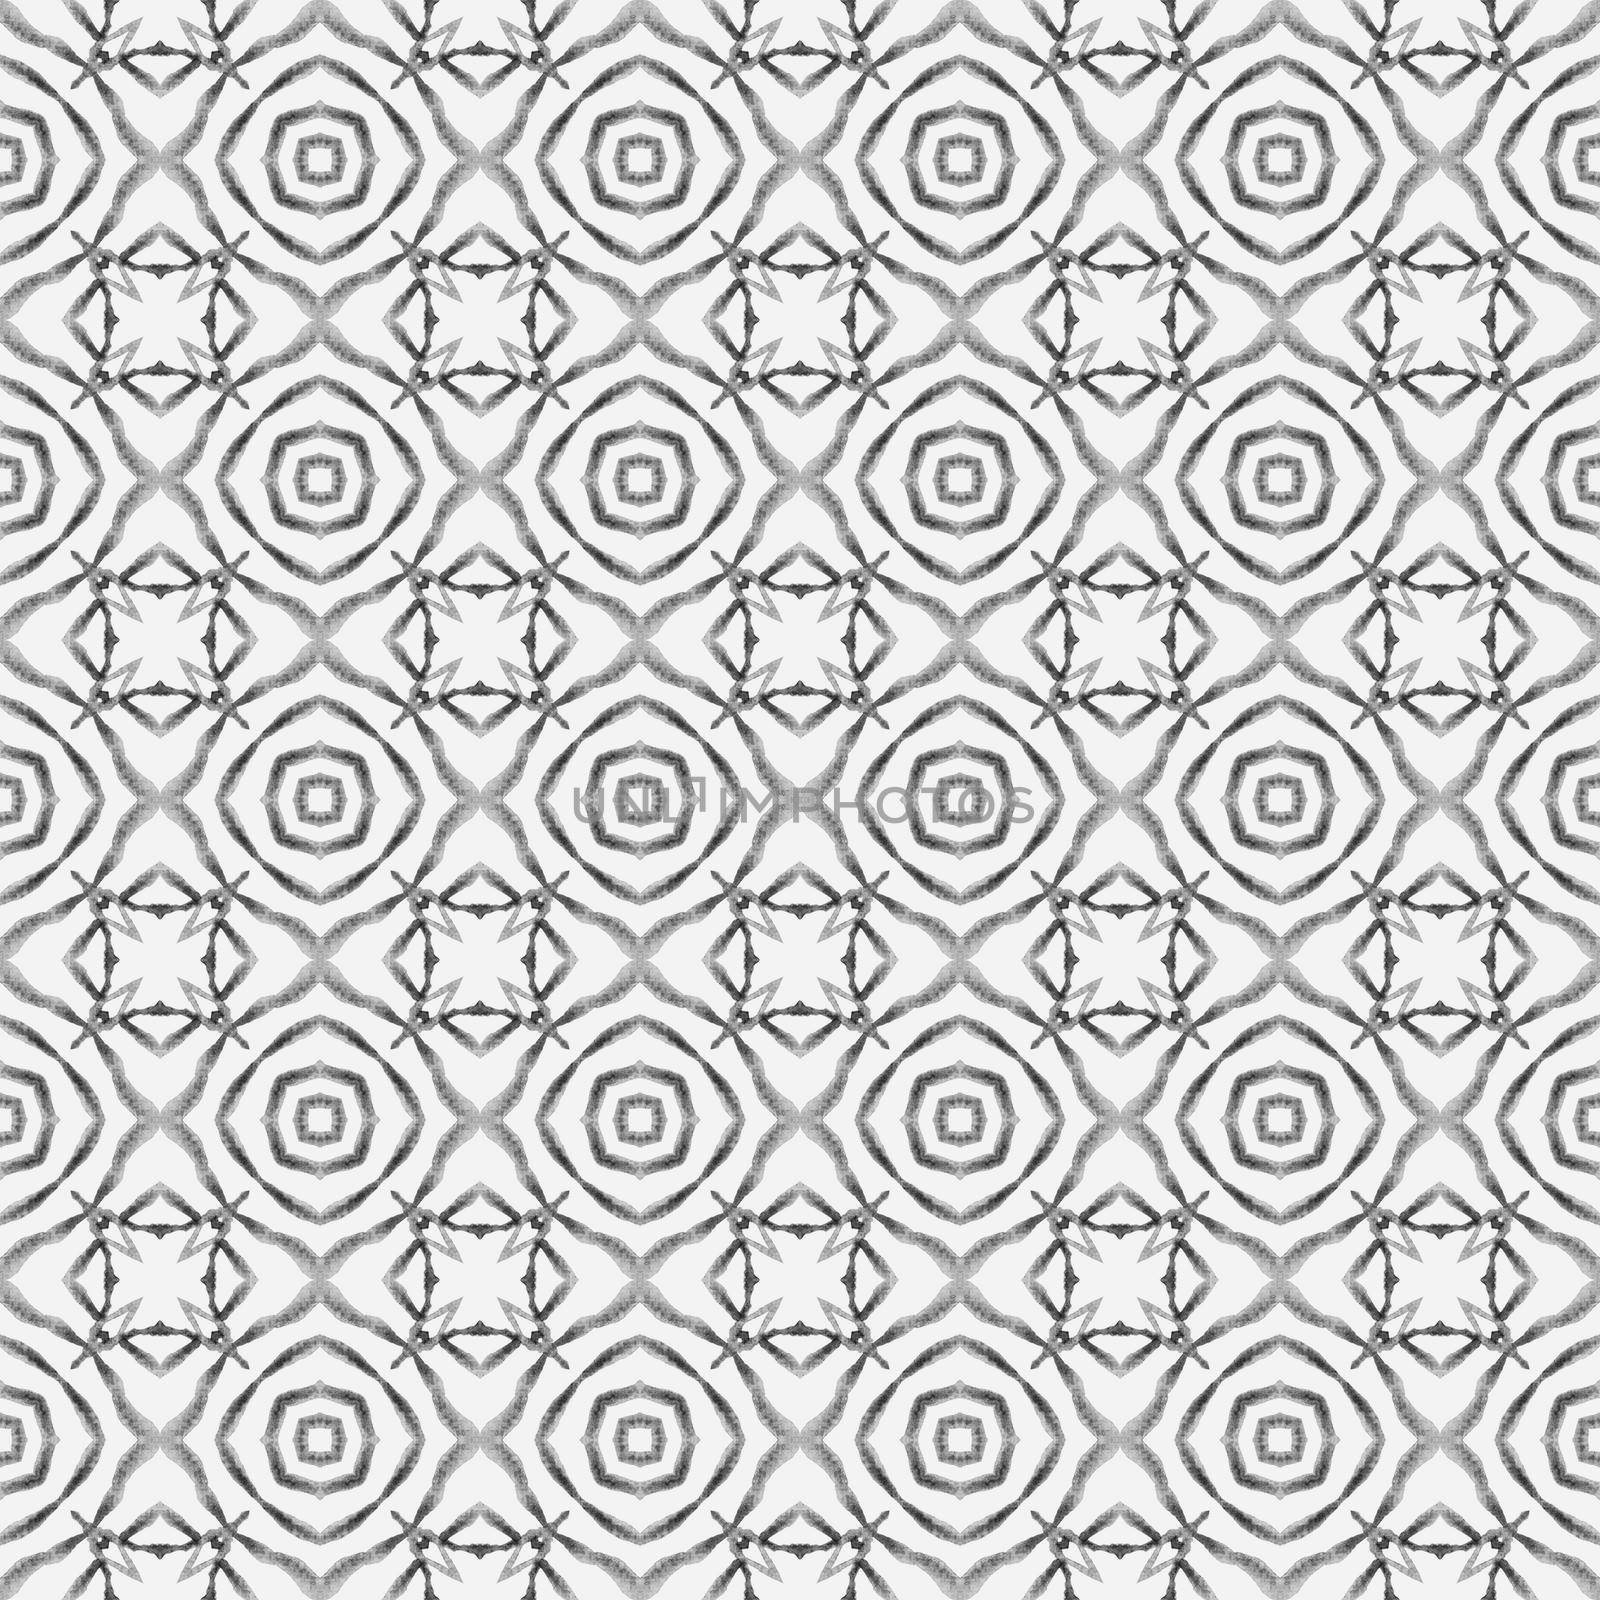 Mosaic seamless pattern. Black and white fancy by beginagain